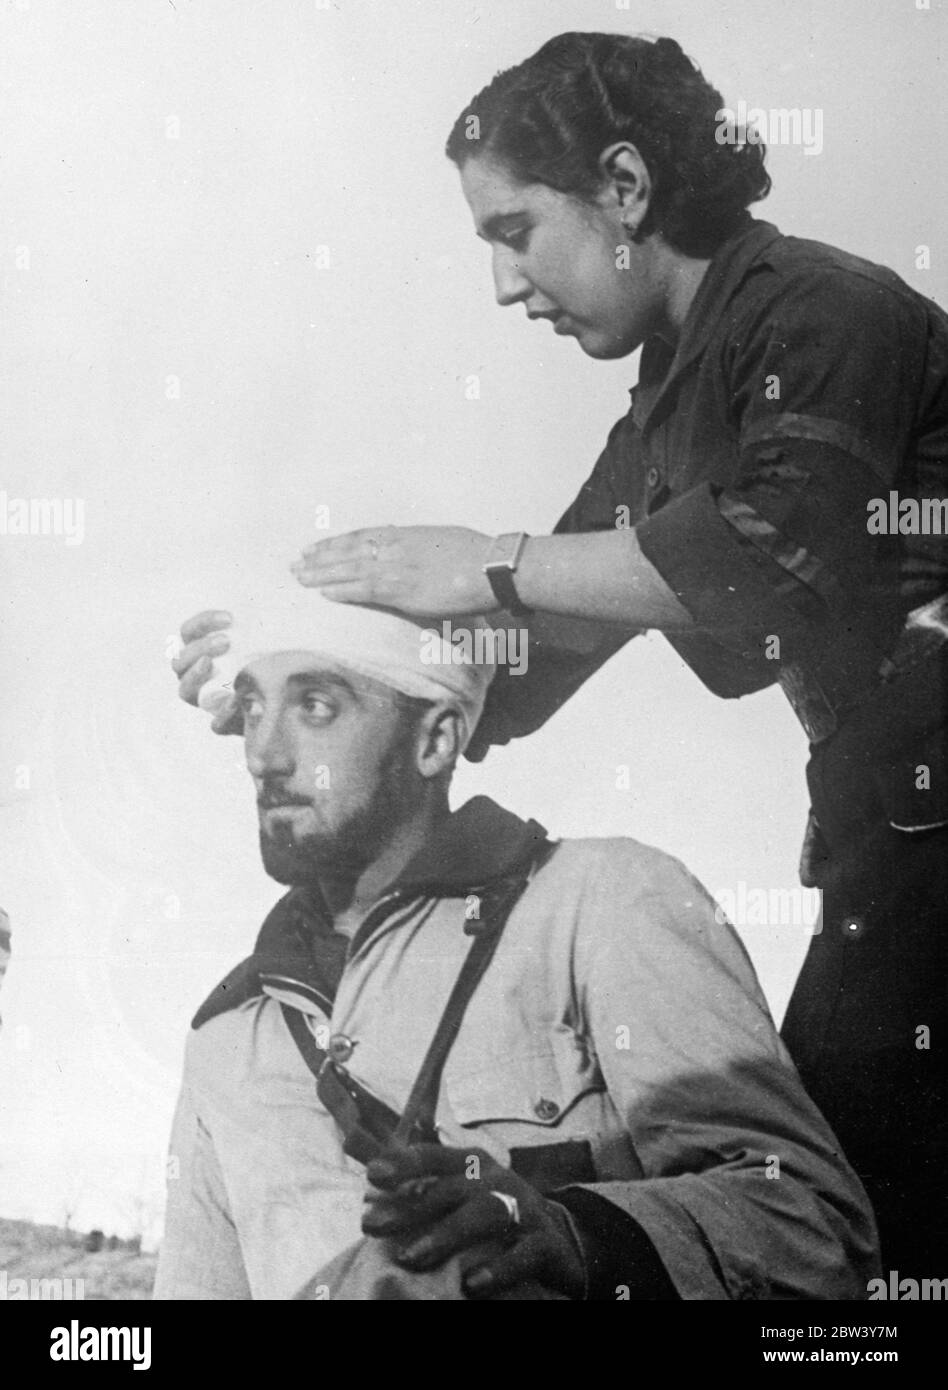 First aid behind the rebel lines . A nurse expertly bandages the head of a wounded member of the Phalangists ( Fascist ) corps attached to Franco ' s rebel troops , at a first aid post behind the lines after a rebel attack to the south of Madrid . 8 March 1937 Stock Photo